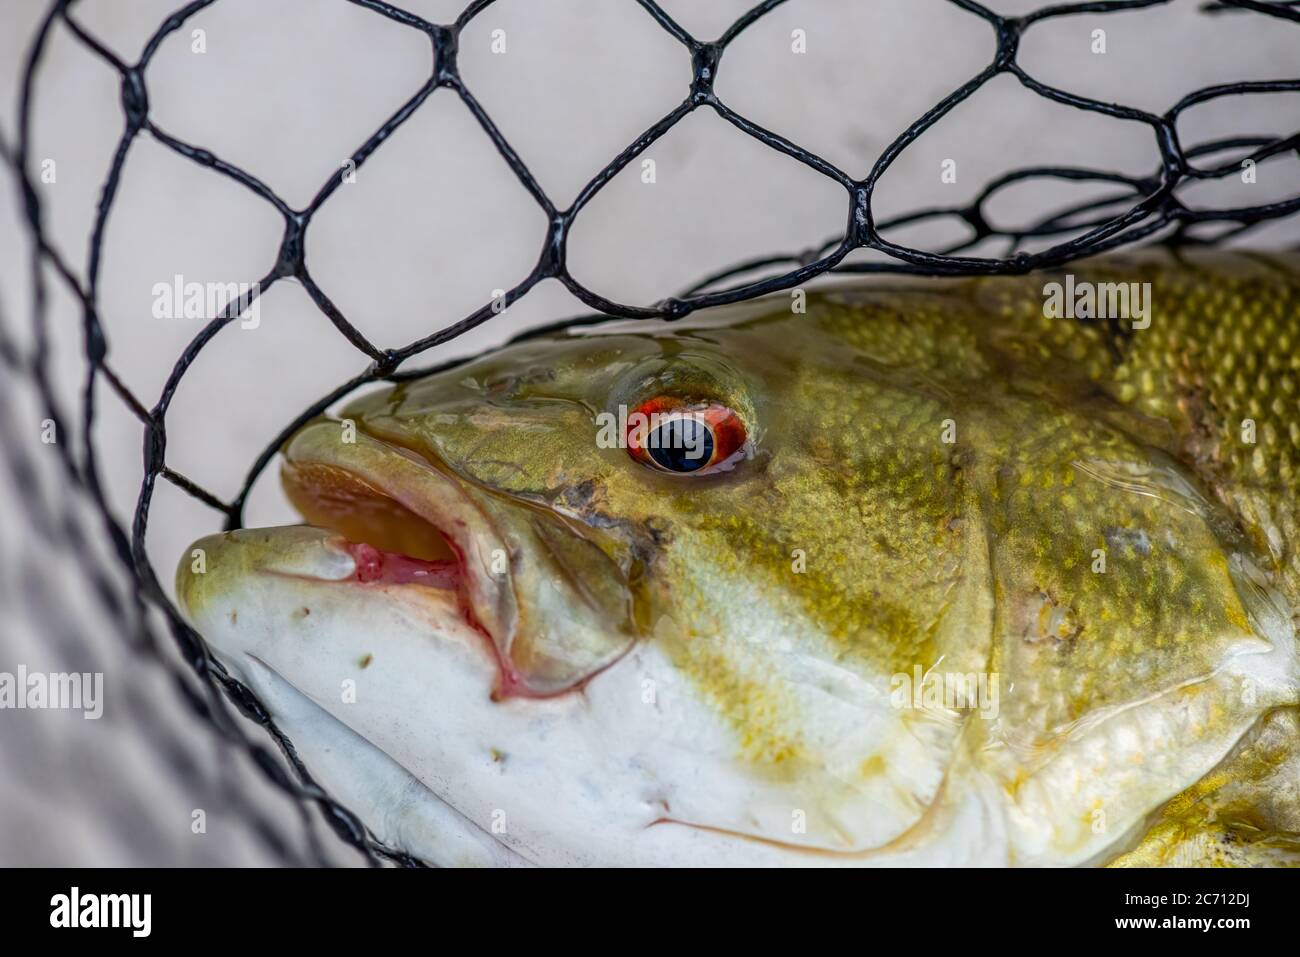 Closeup of a smallmouth bass (Micropterus dolomieu) with fishing net in background. Stock Photo